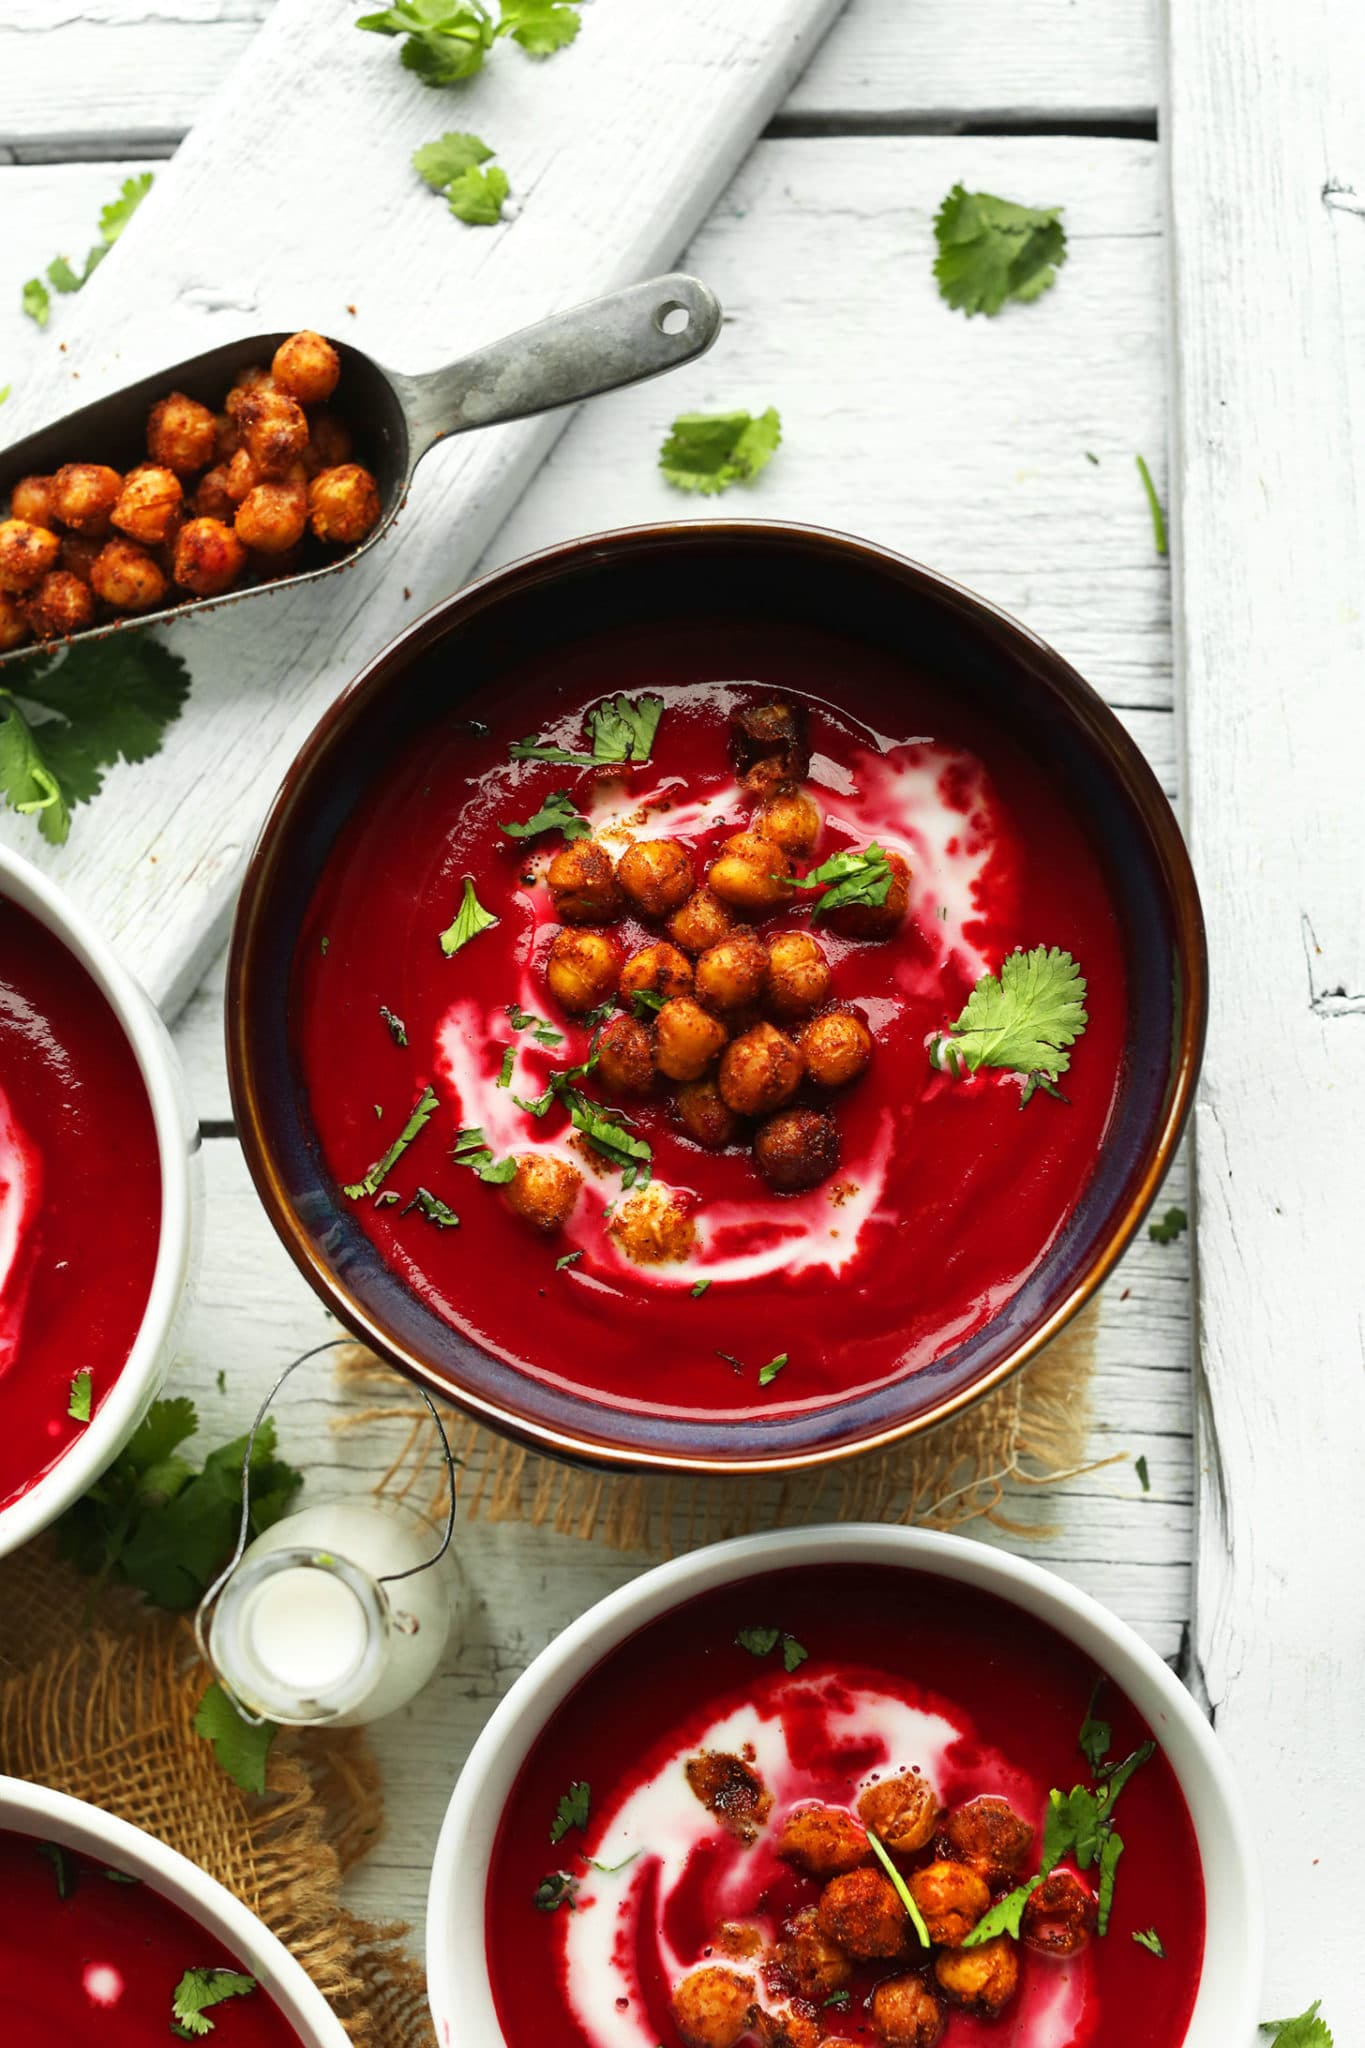 A bowl of curried beet soup topped with tandoori chickpeas and some greens in a dark maroon bowl on a light background with a scoop of chickpeas beside it.